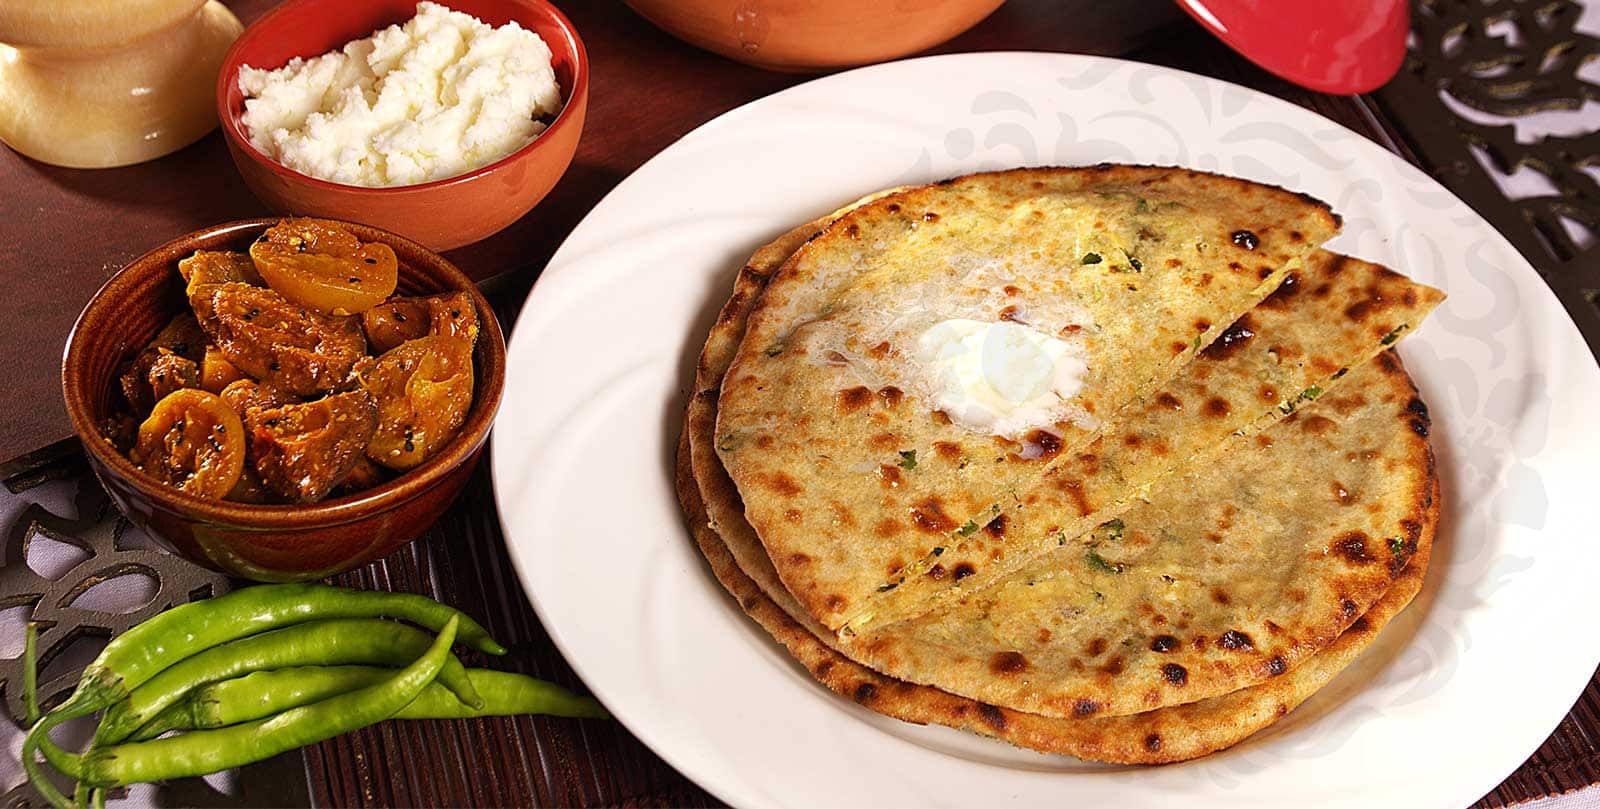 12 Highway Dhabas in India That Should be on Your Must Visit List